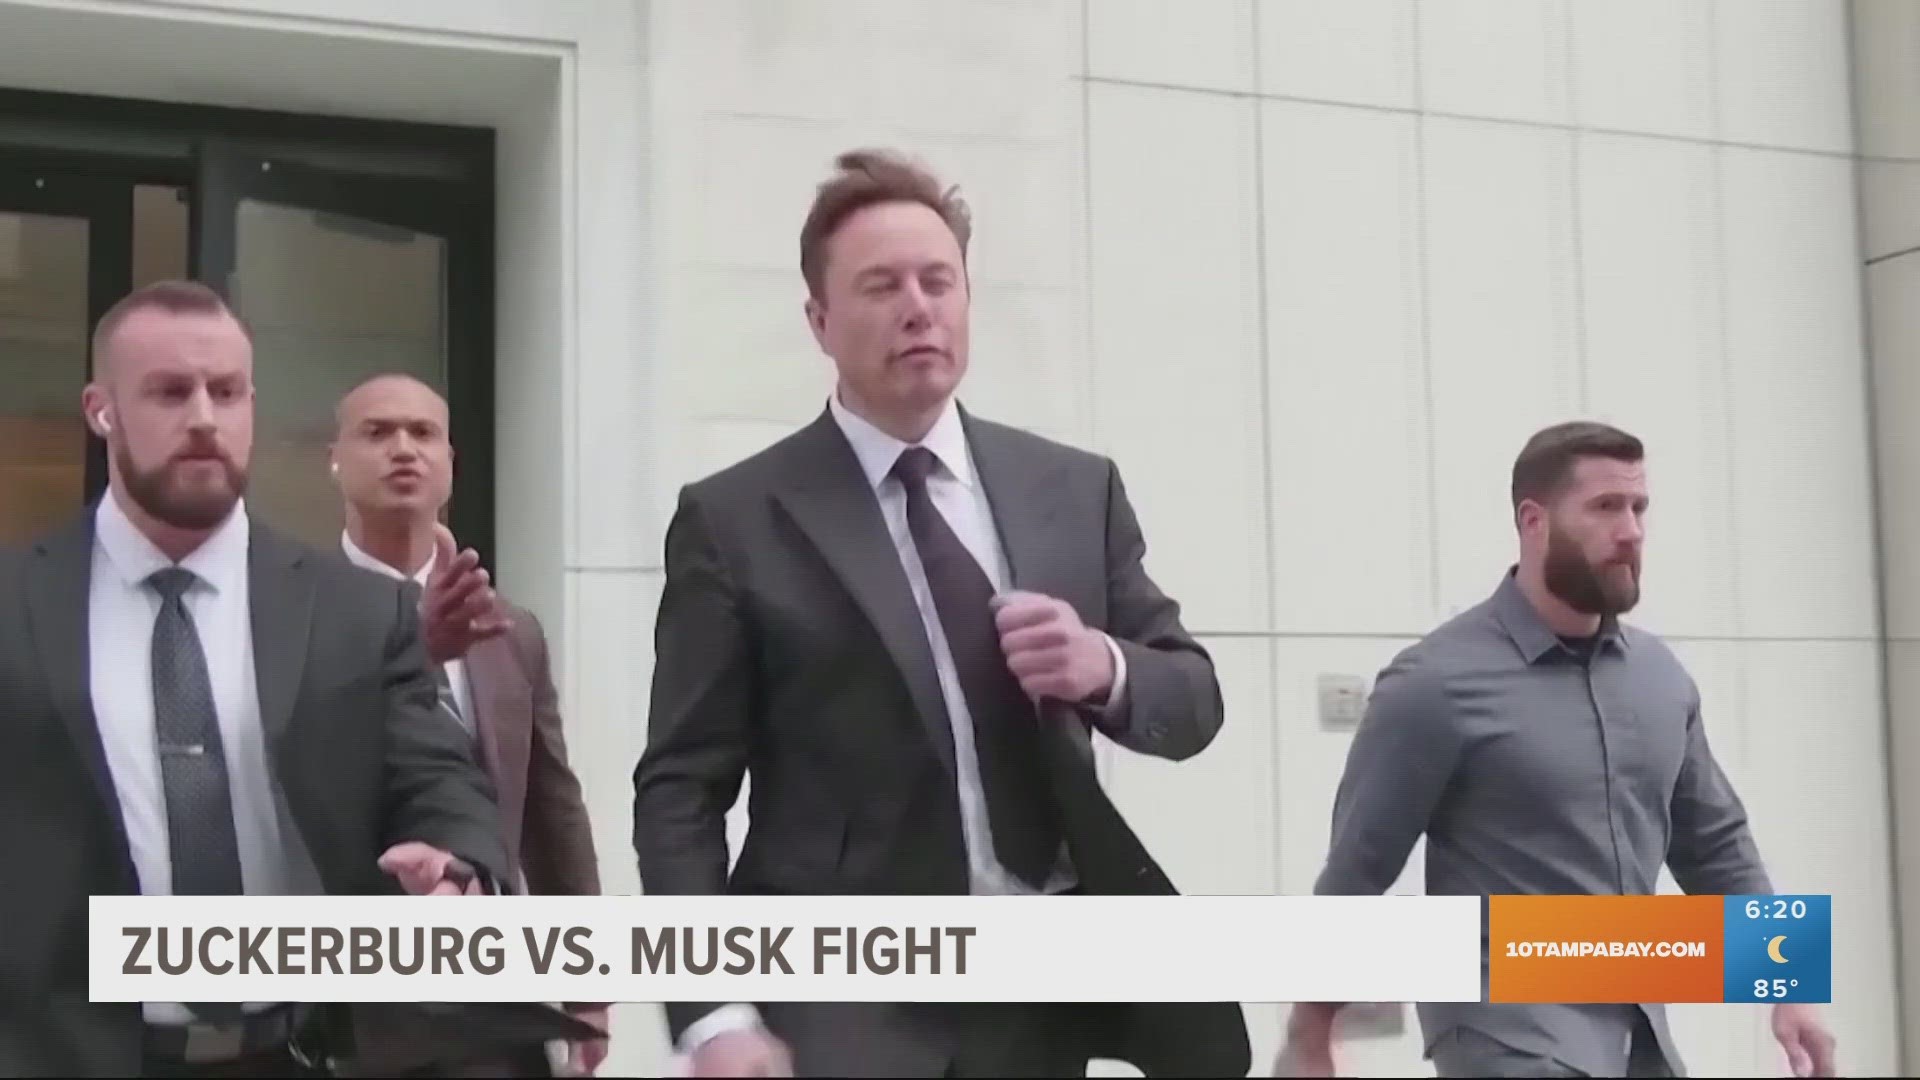 The two tech billionaires seemingly agreed to a “cage match” face-off in late June, and Musk says he's training by lifting weights at work.